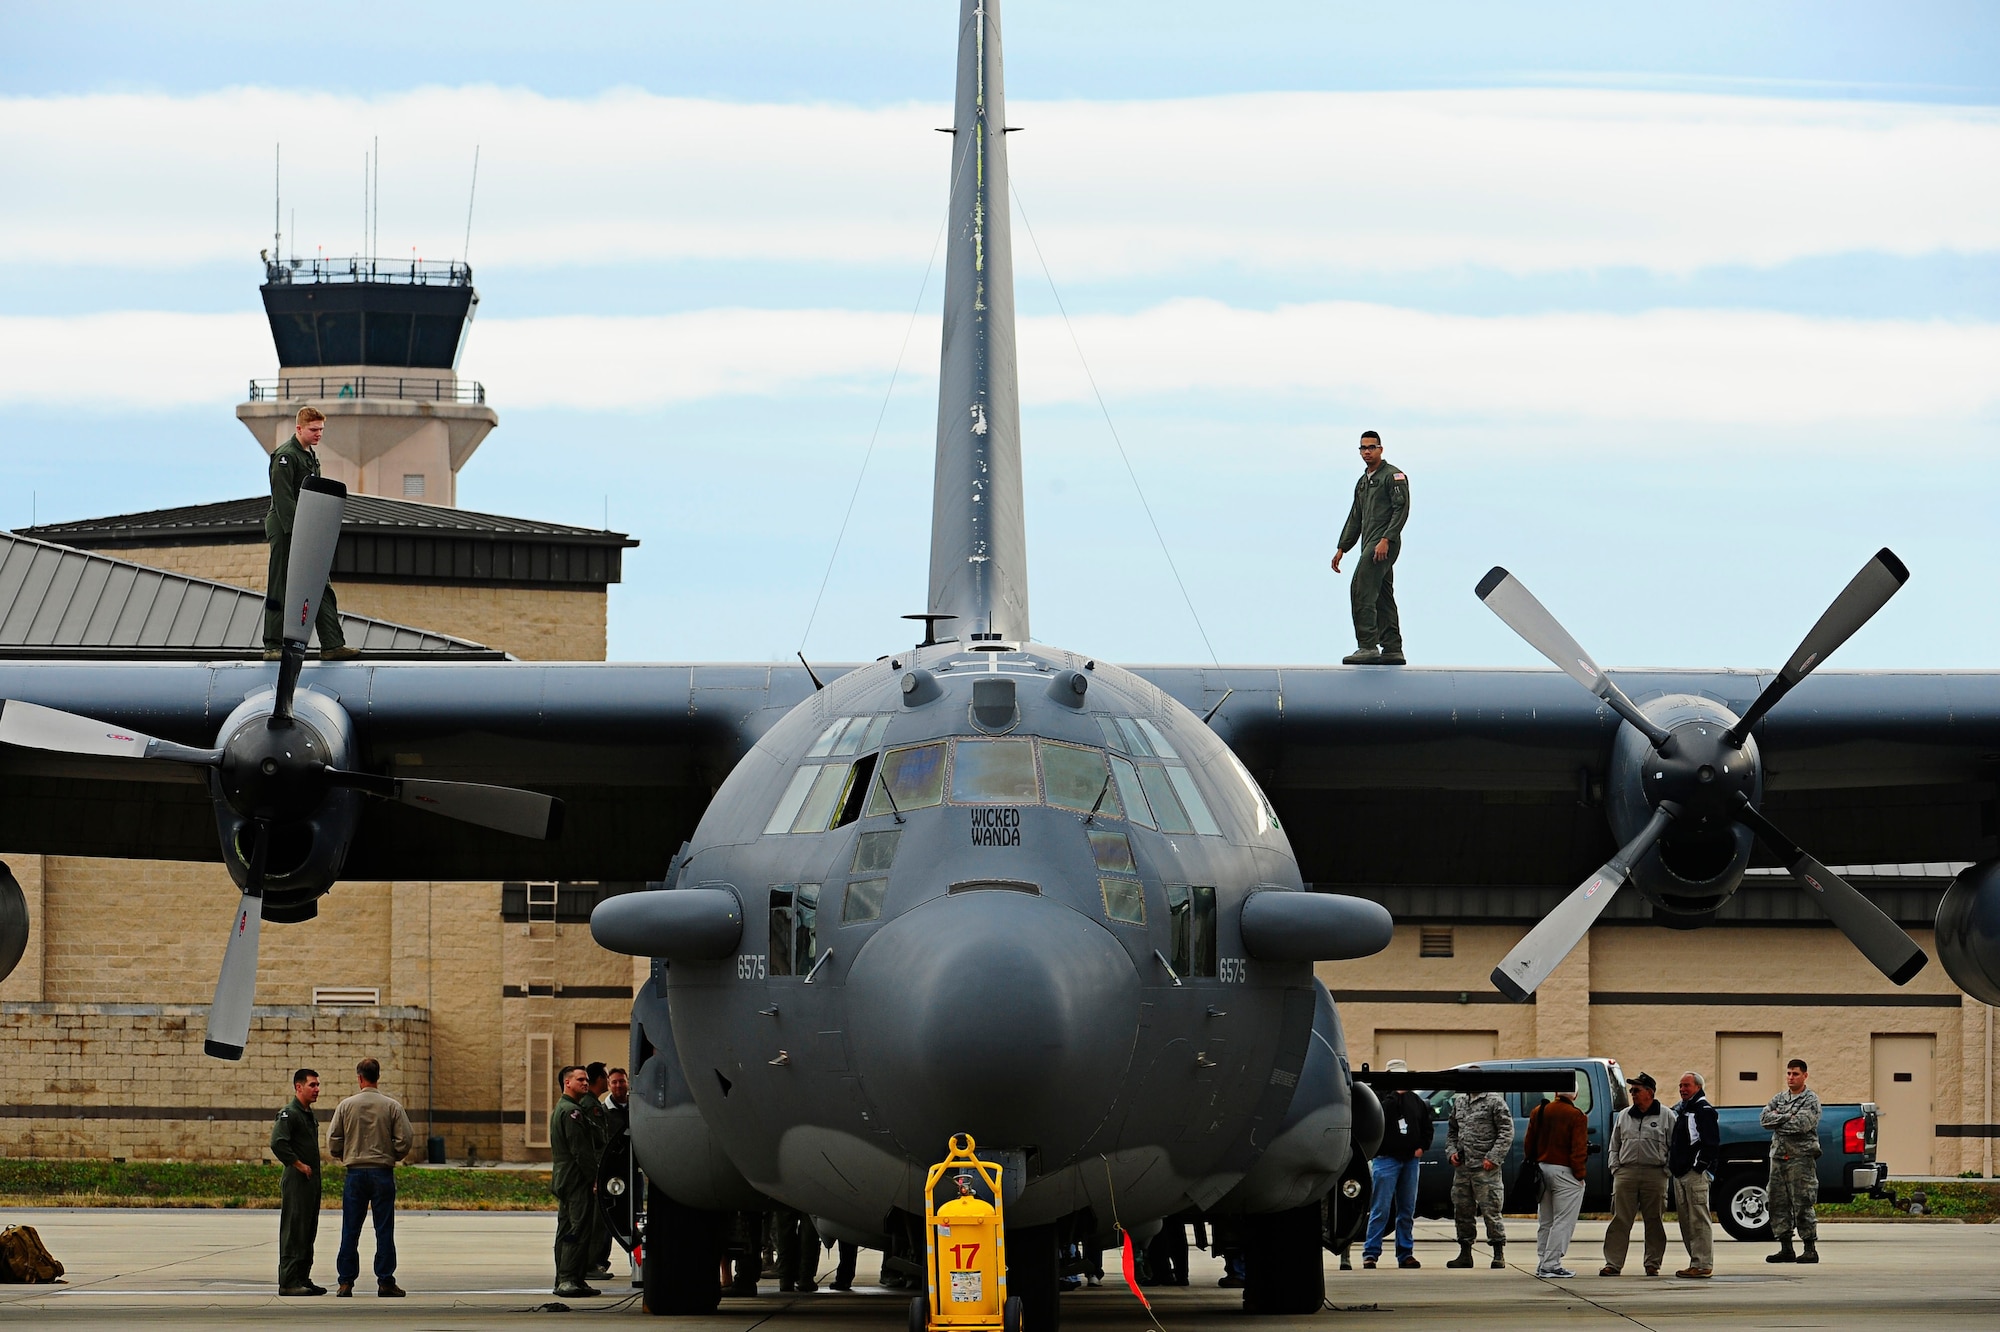 Airman 1st Class Taylor Williams and Ian Robinson, 4th Special Operations Squadron special missions aviators, perform their last post flight check on an AC-130H Spectre gunship nicknamed “Wicked Wanda” on Hurlburt Field, Fla., Dec. 19, 2014. ”Wicked Wanda” was flown during the Iran Hostage Crisis. (U.S. Air Force photo/Senior Airman Desiree W. Moye)